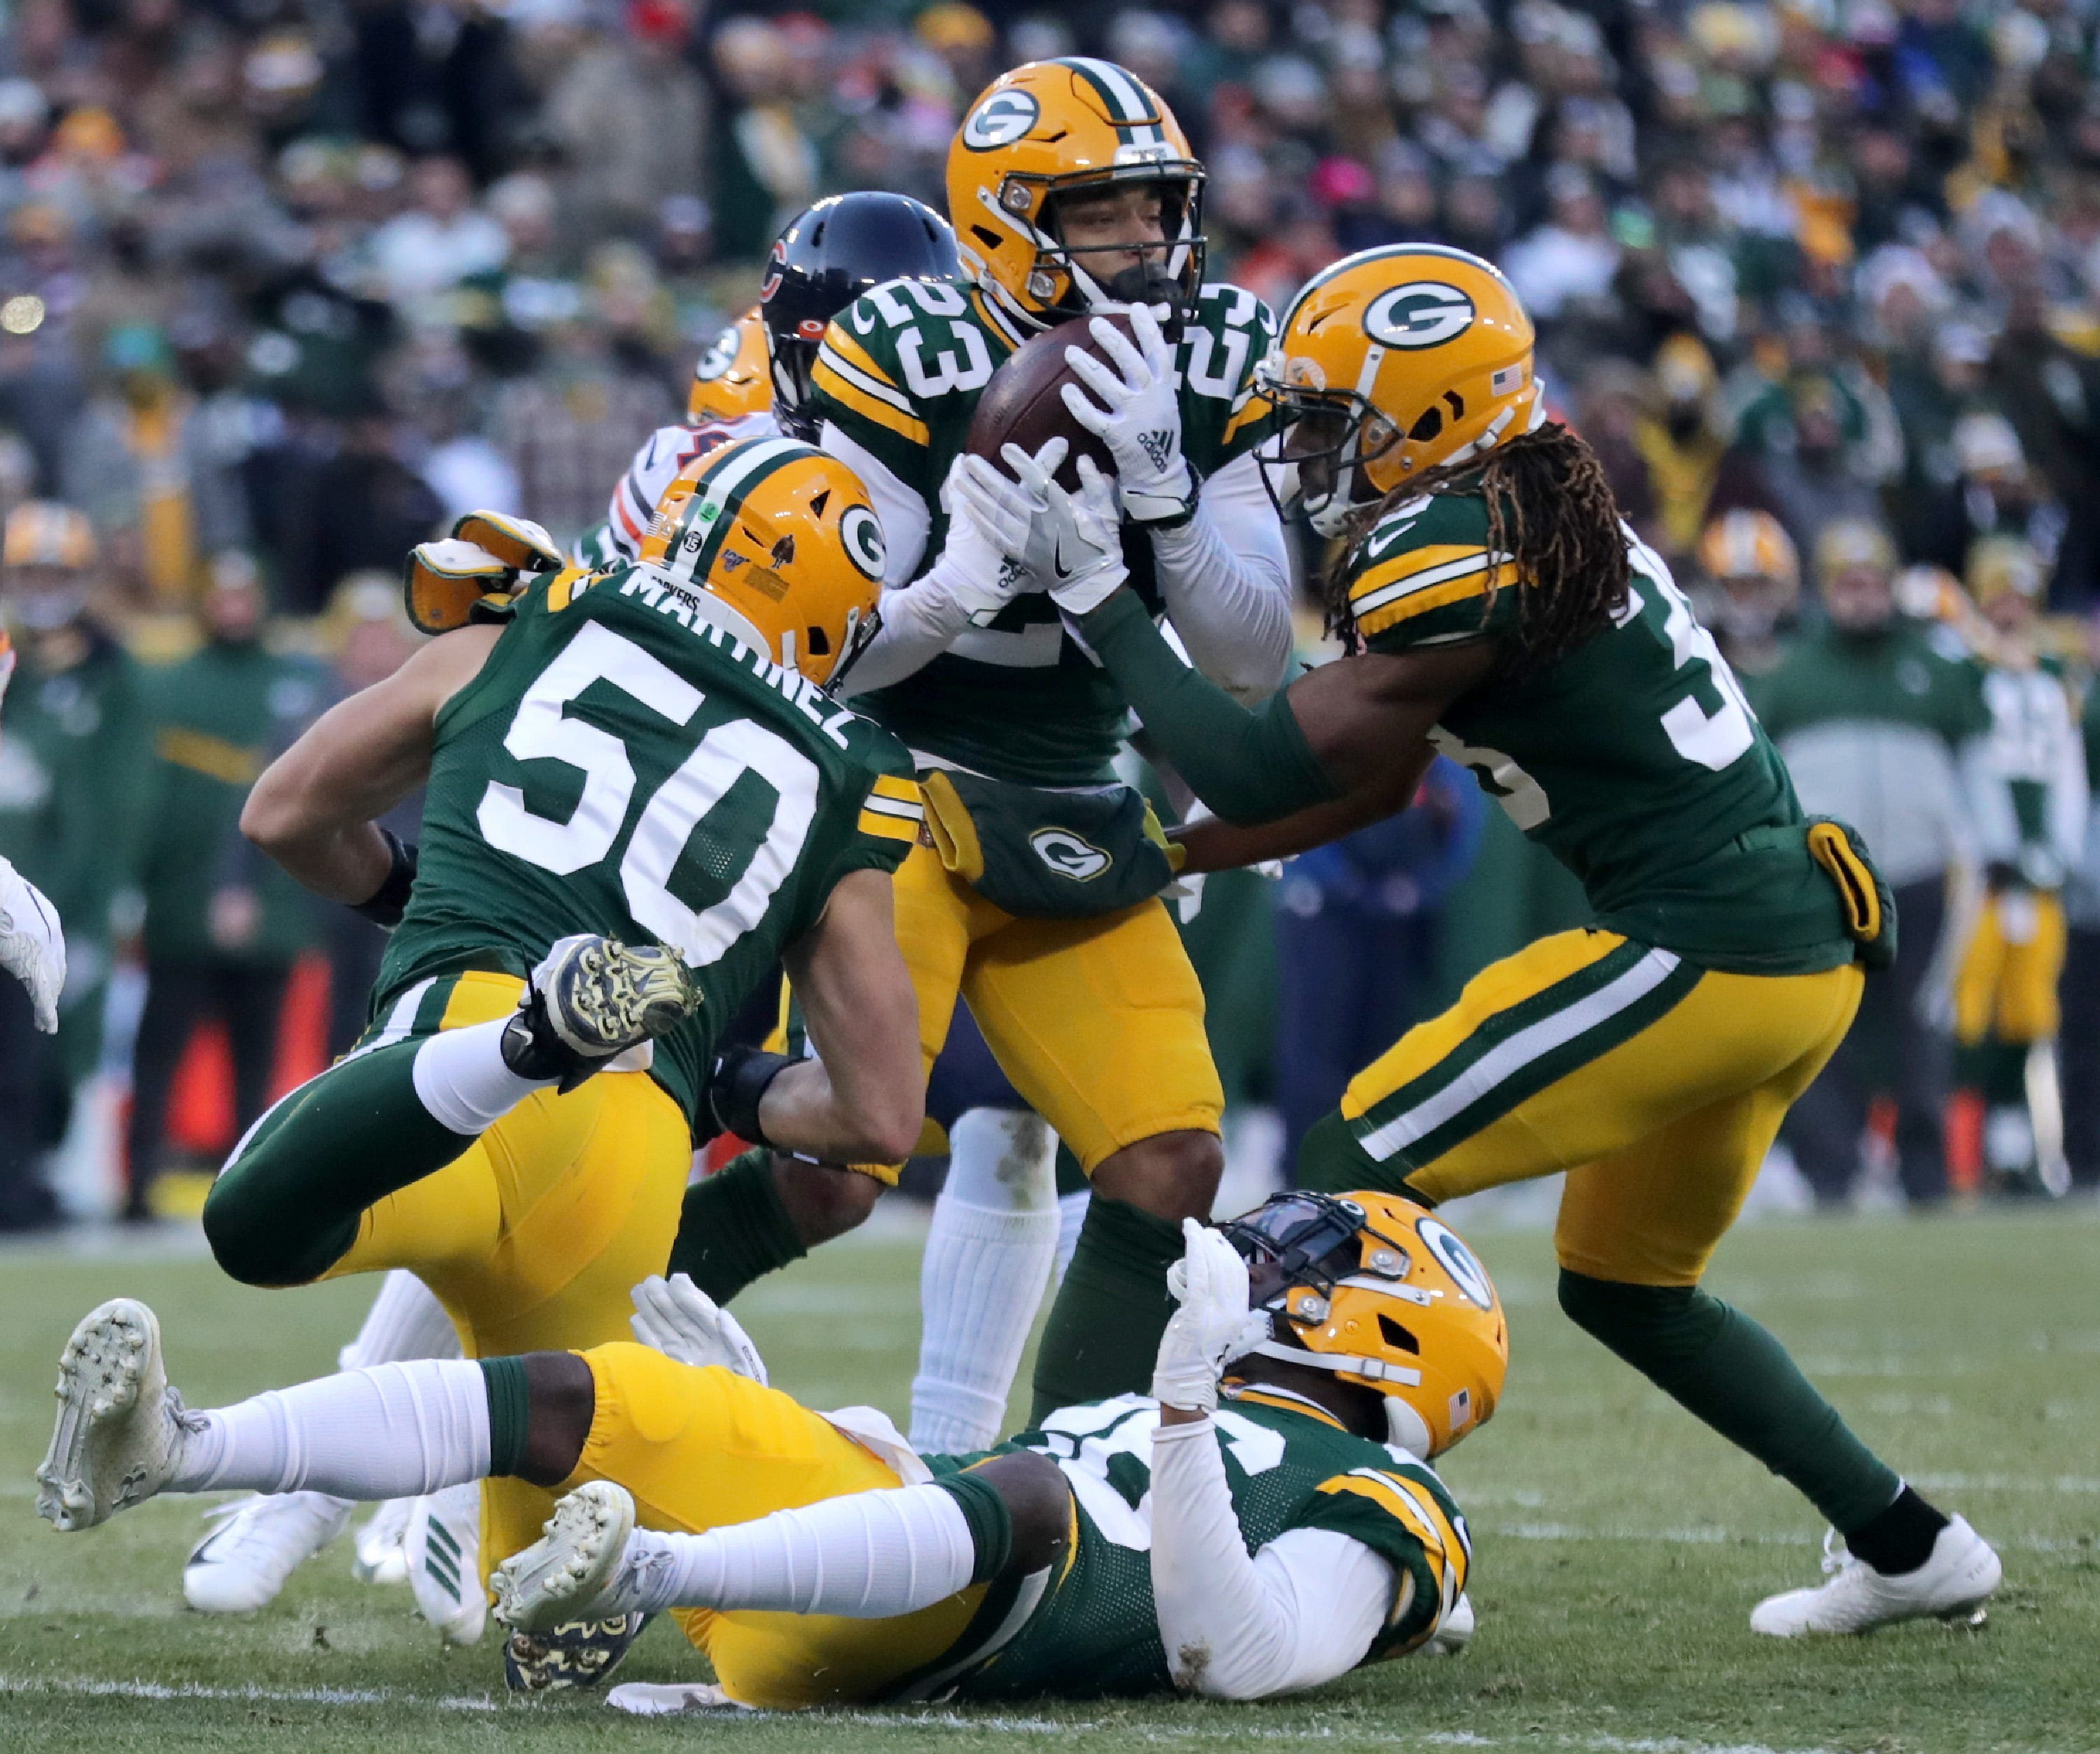 Green Bay Packers cornerback Jaire Alexander (23) intercepts a late second quarter pass against the Chicago Bears during their football game on Sunday, December 15, 2019, at Lambeau Field in Green Bay, Wis.